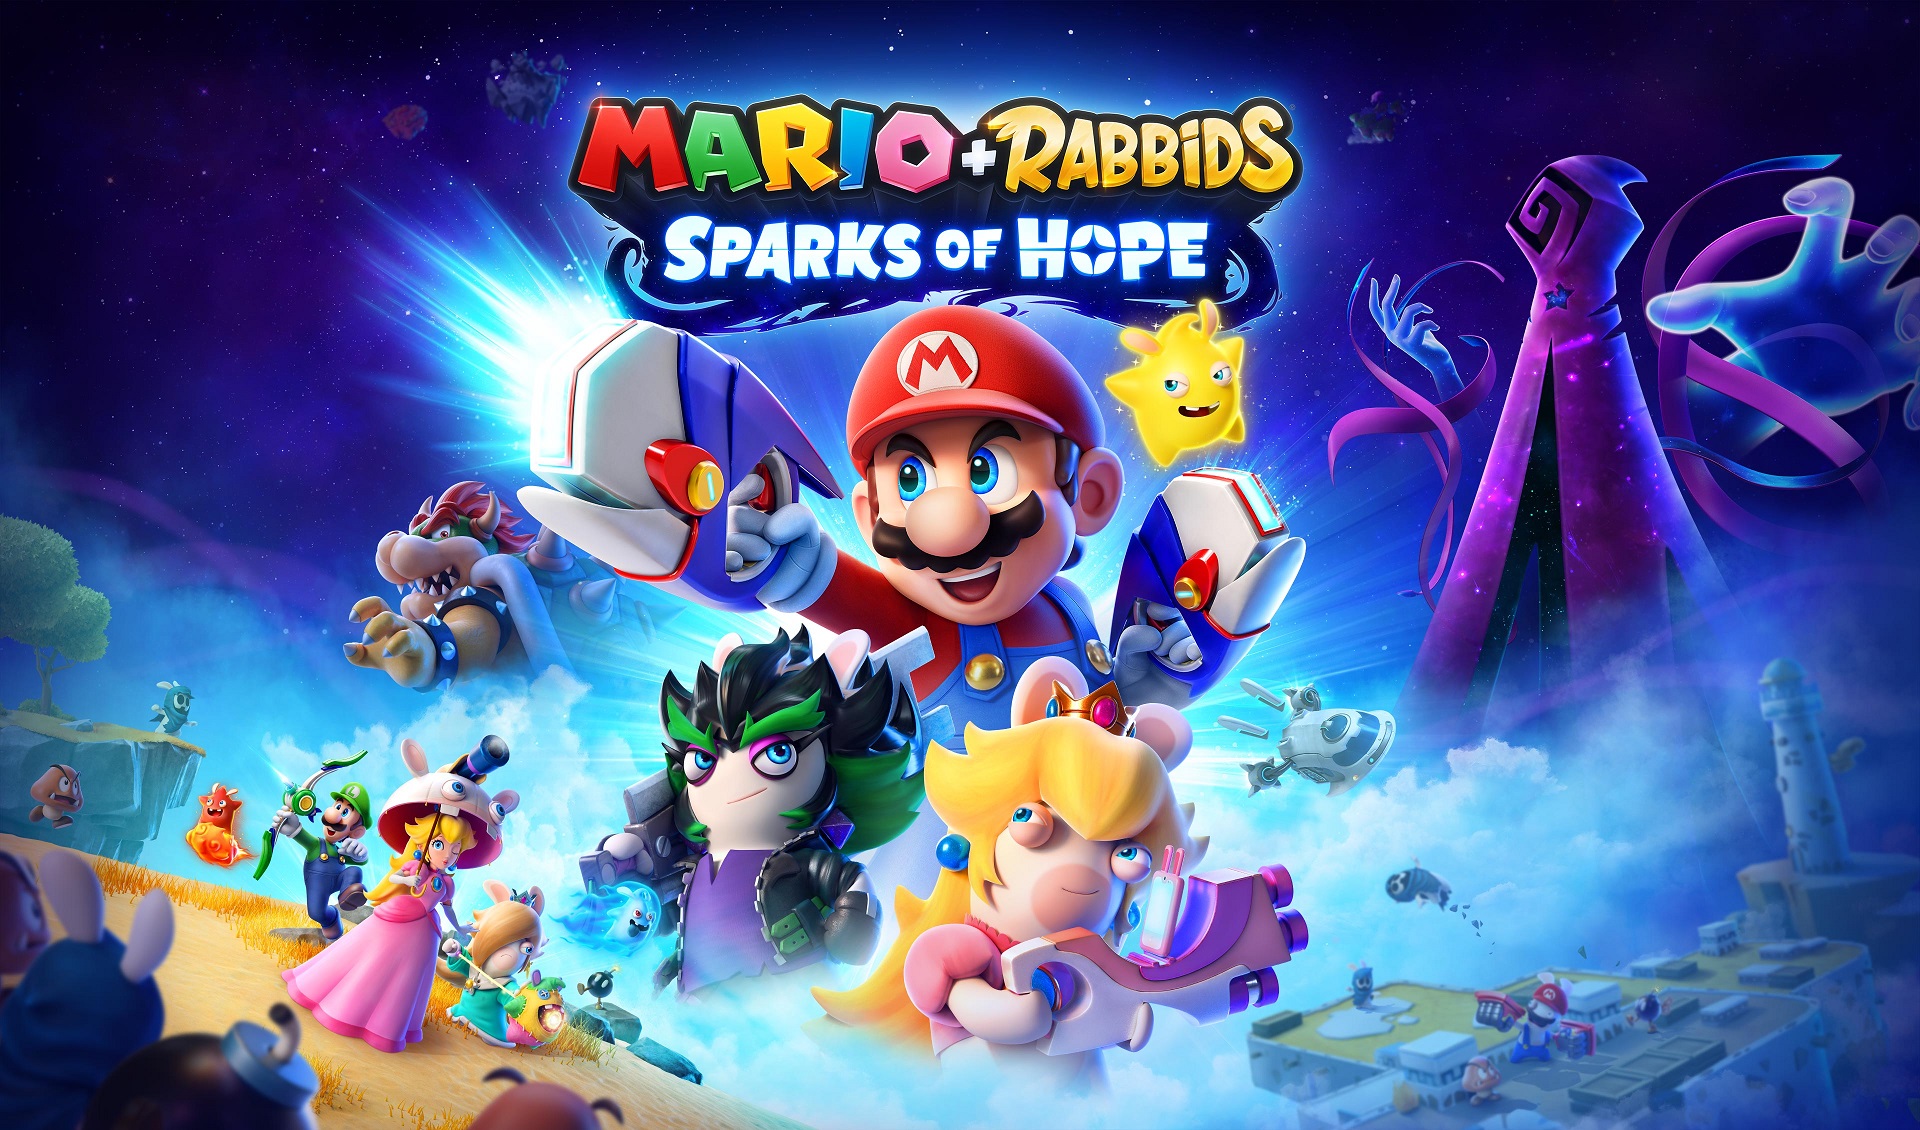 Mario + Rabbids: Sparks of Hope is out now on Switch